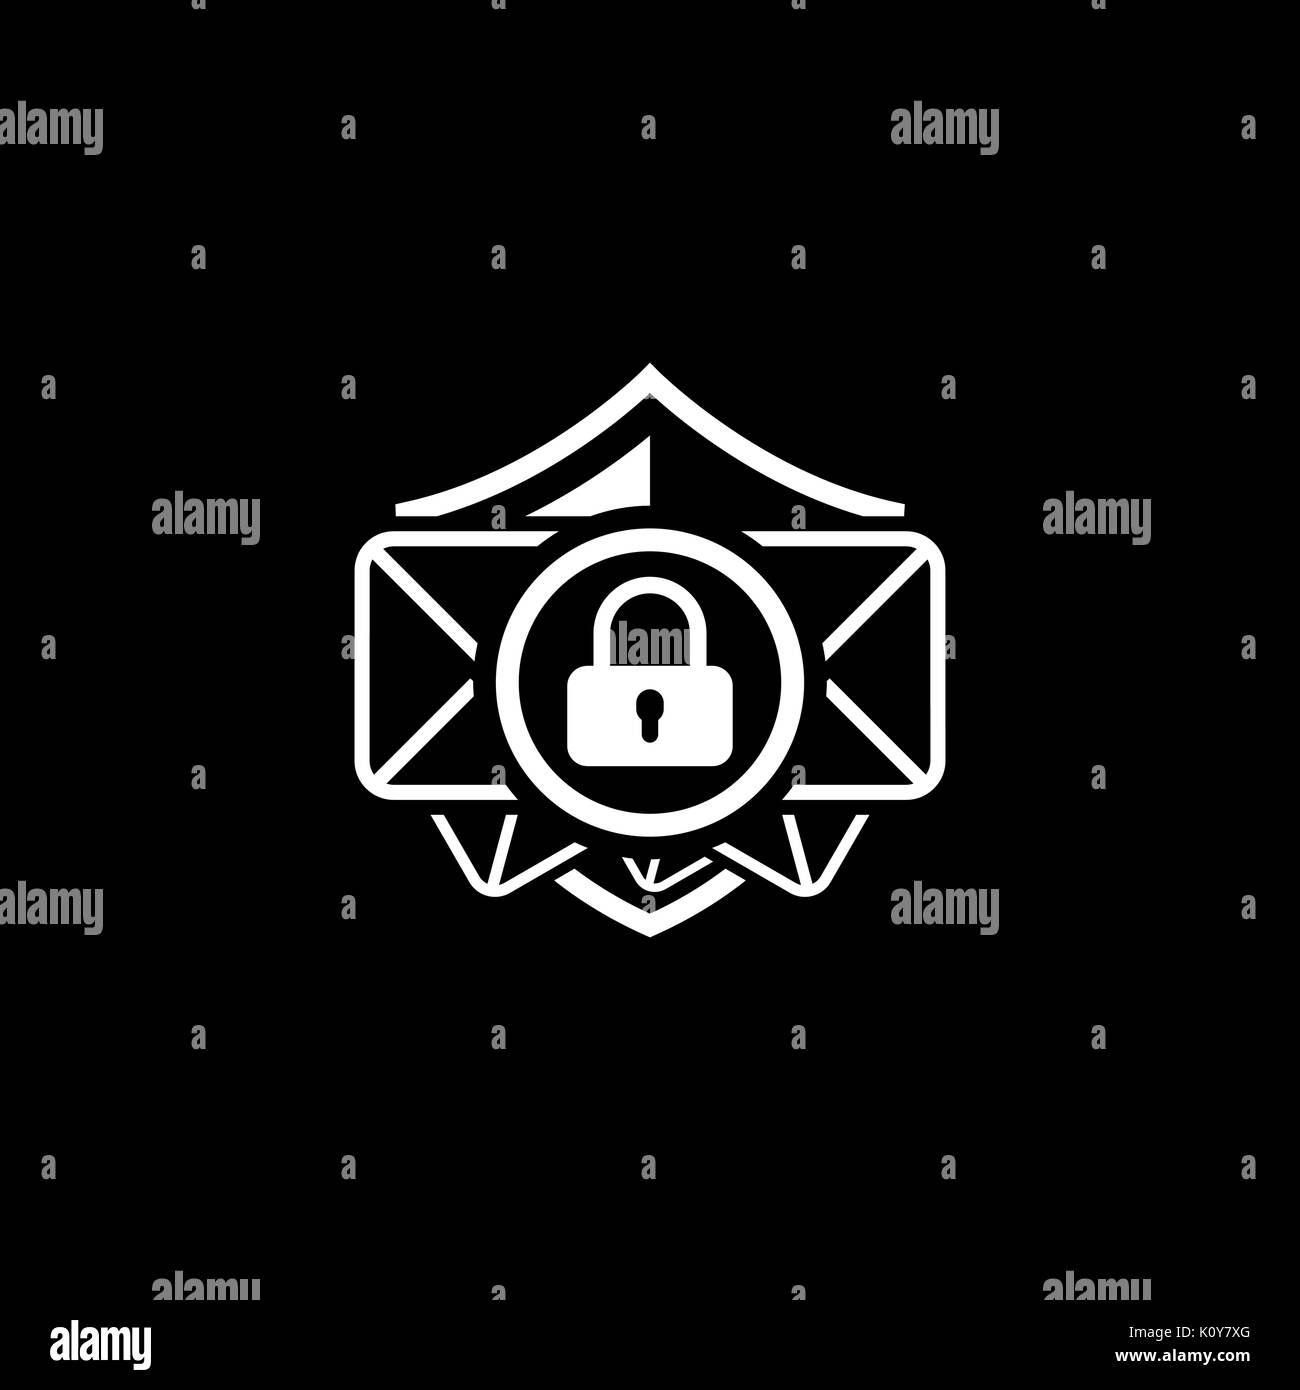 Email Security Icon. Flat Design. Stock Vector